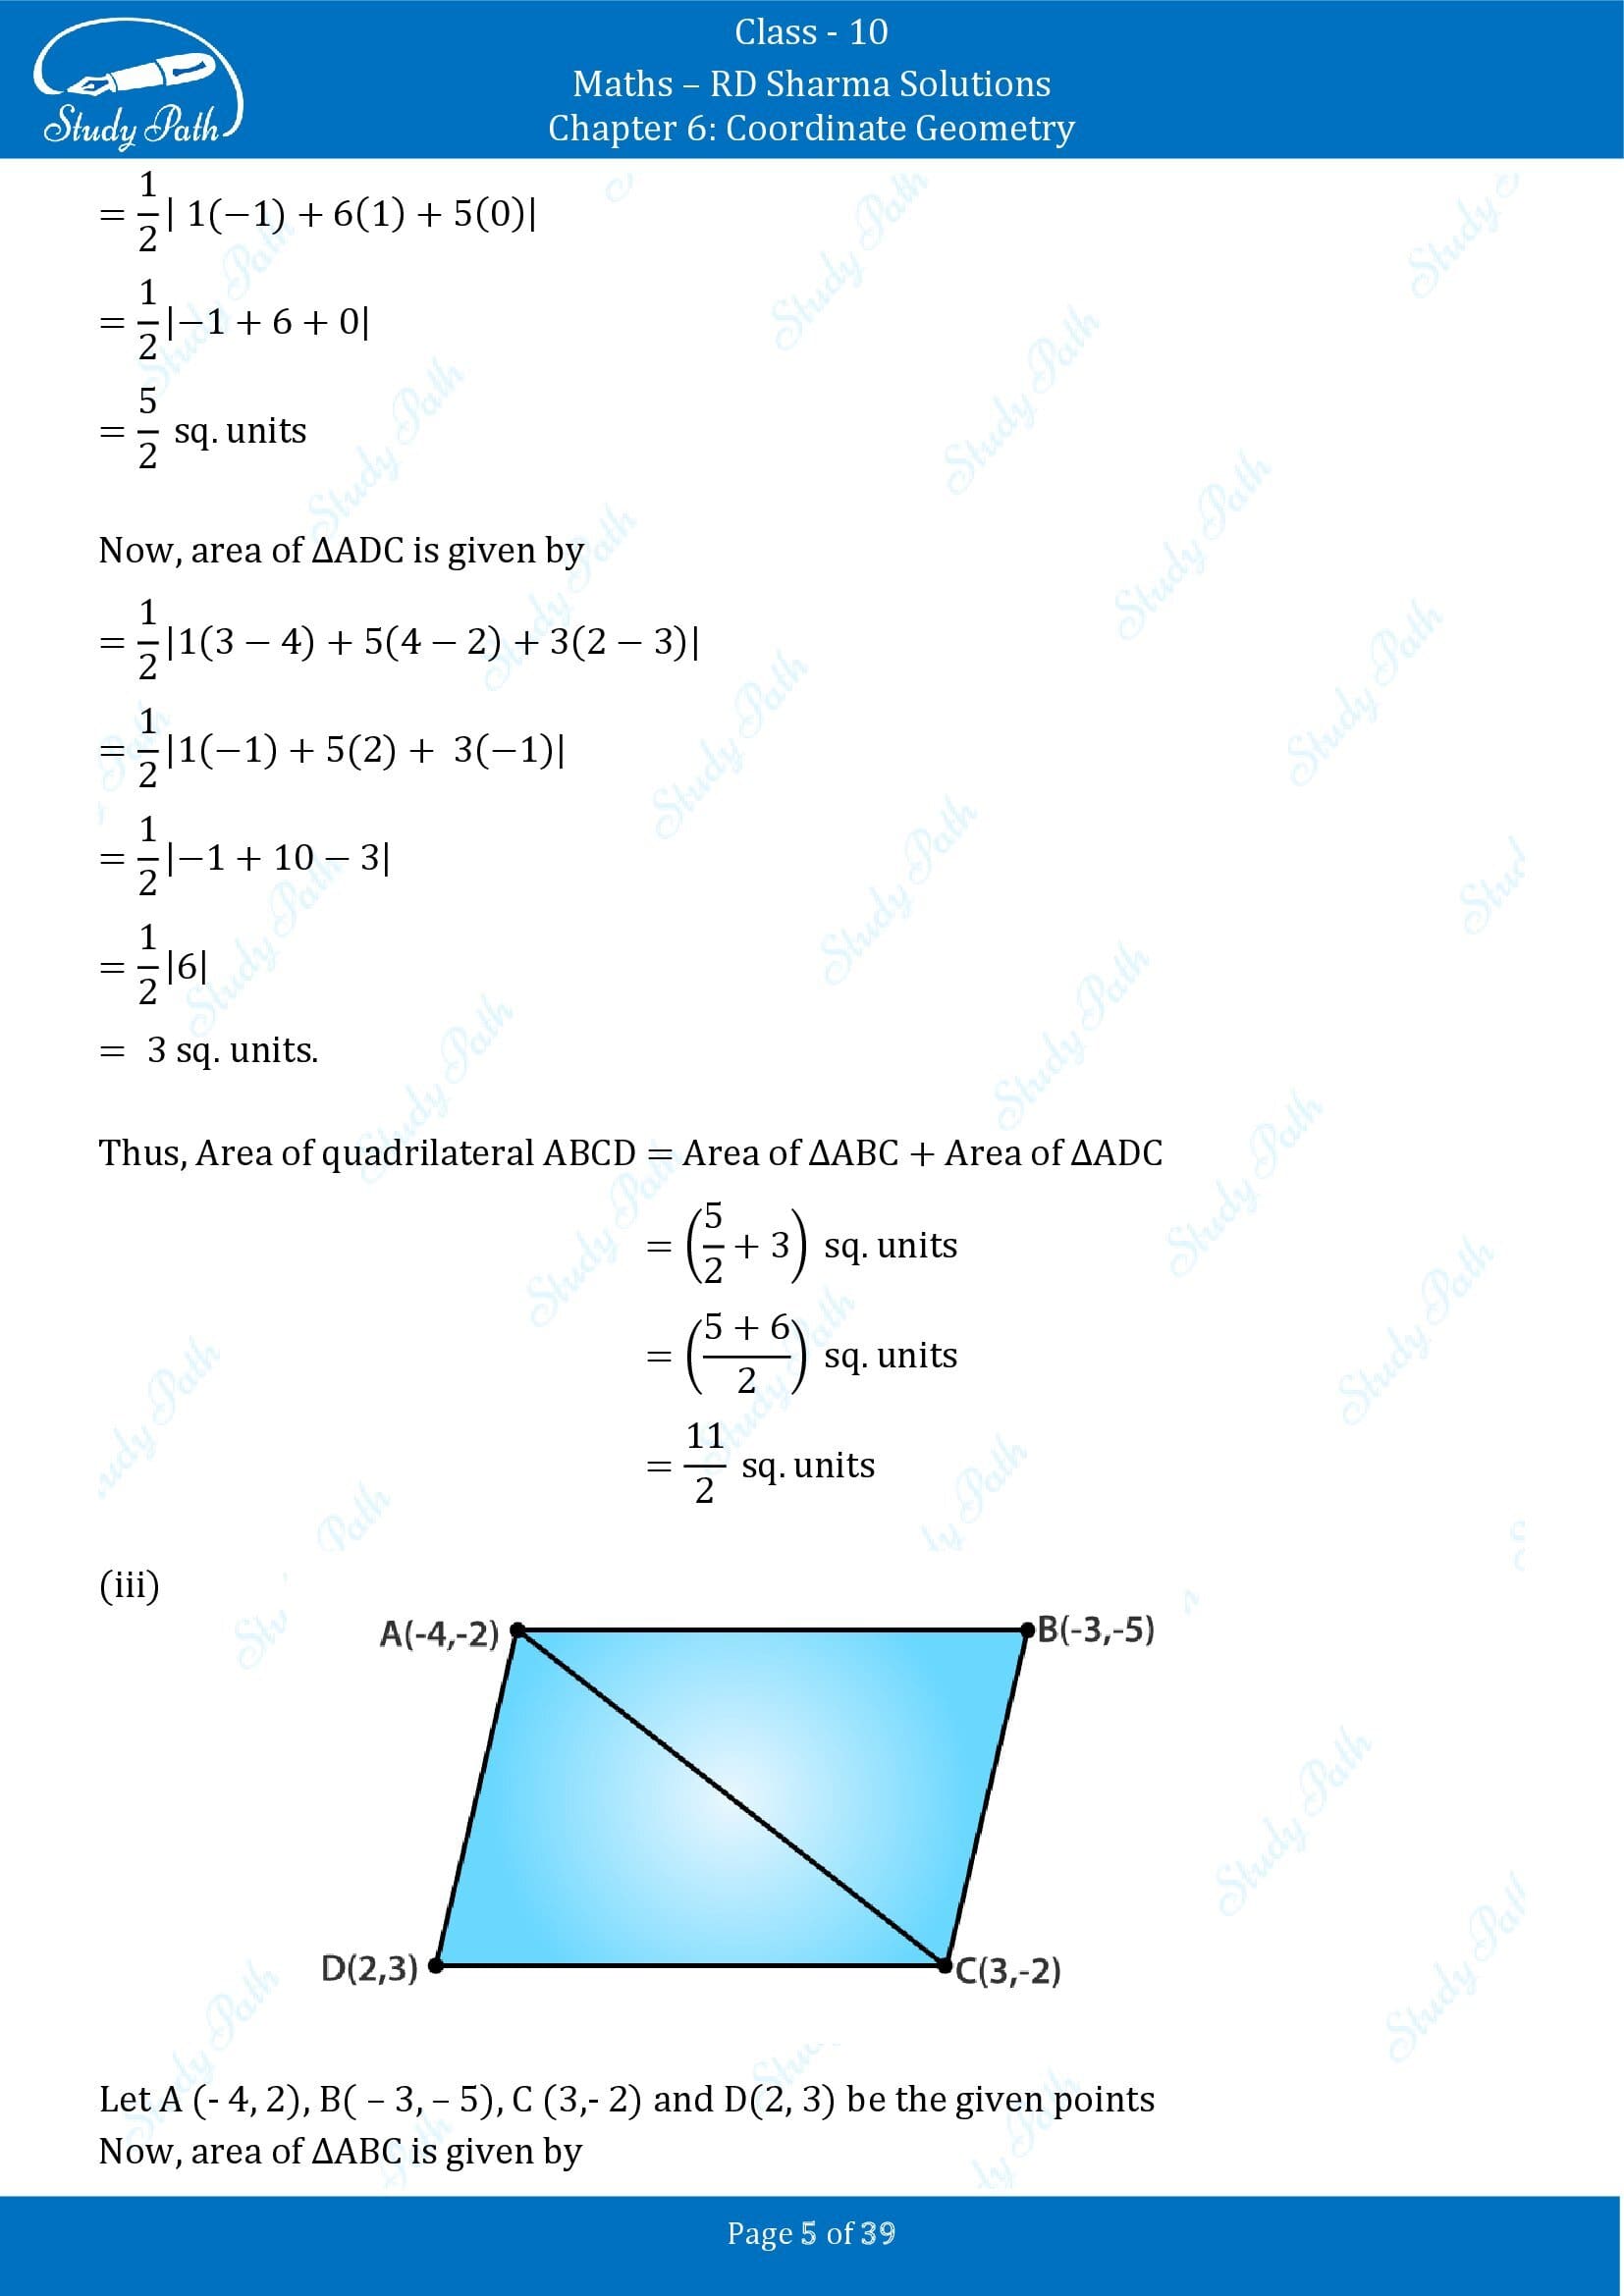 RD Sharma Solutions Class 10 Chapter 6 Coordinate Geometry Exercise 6.5 0005